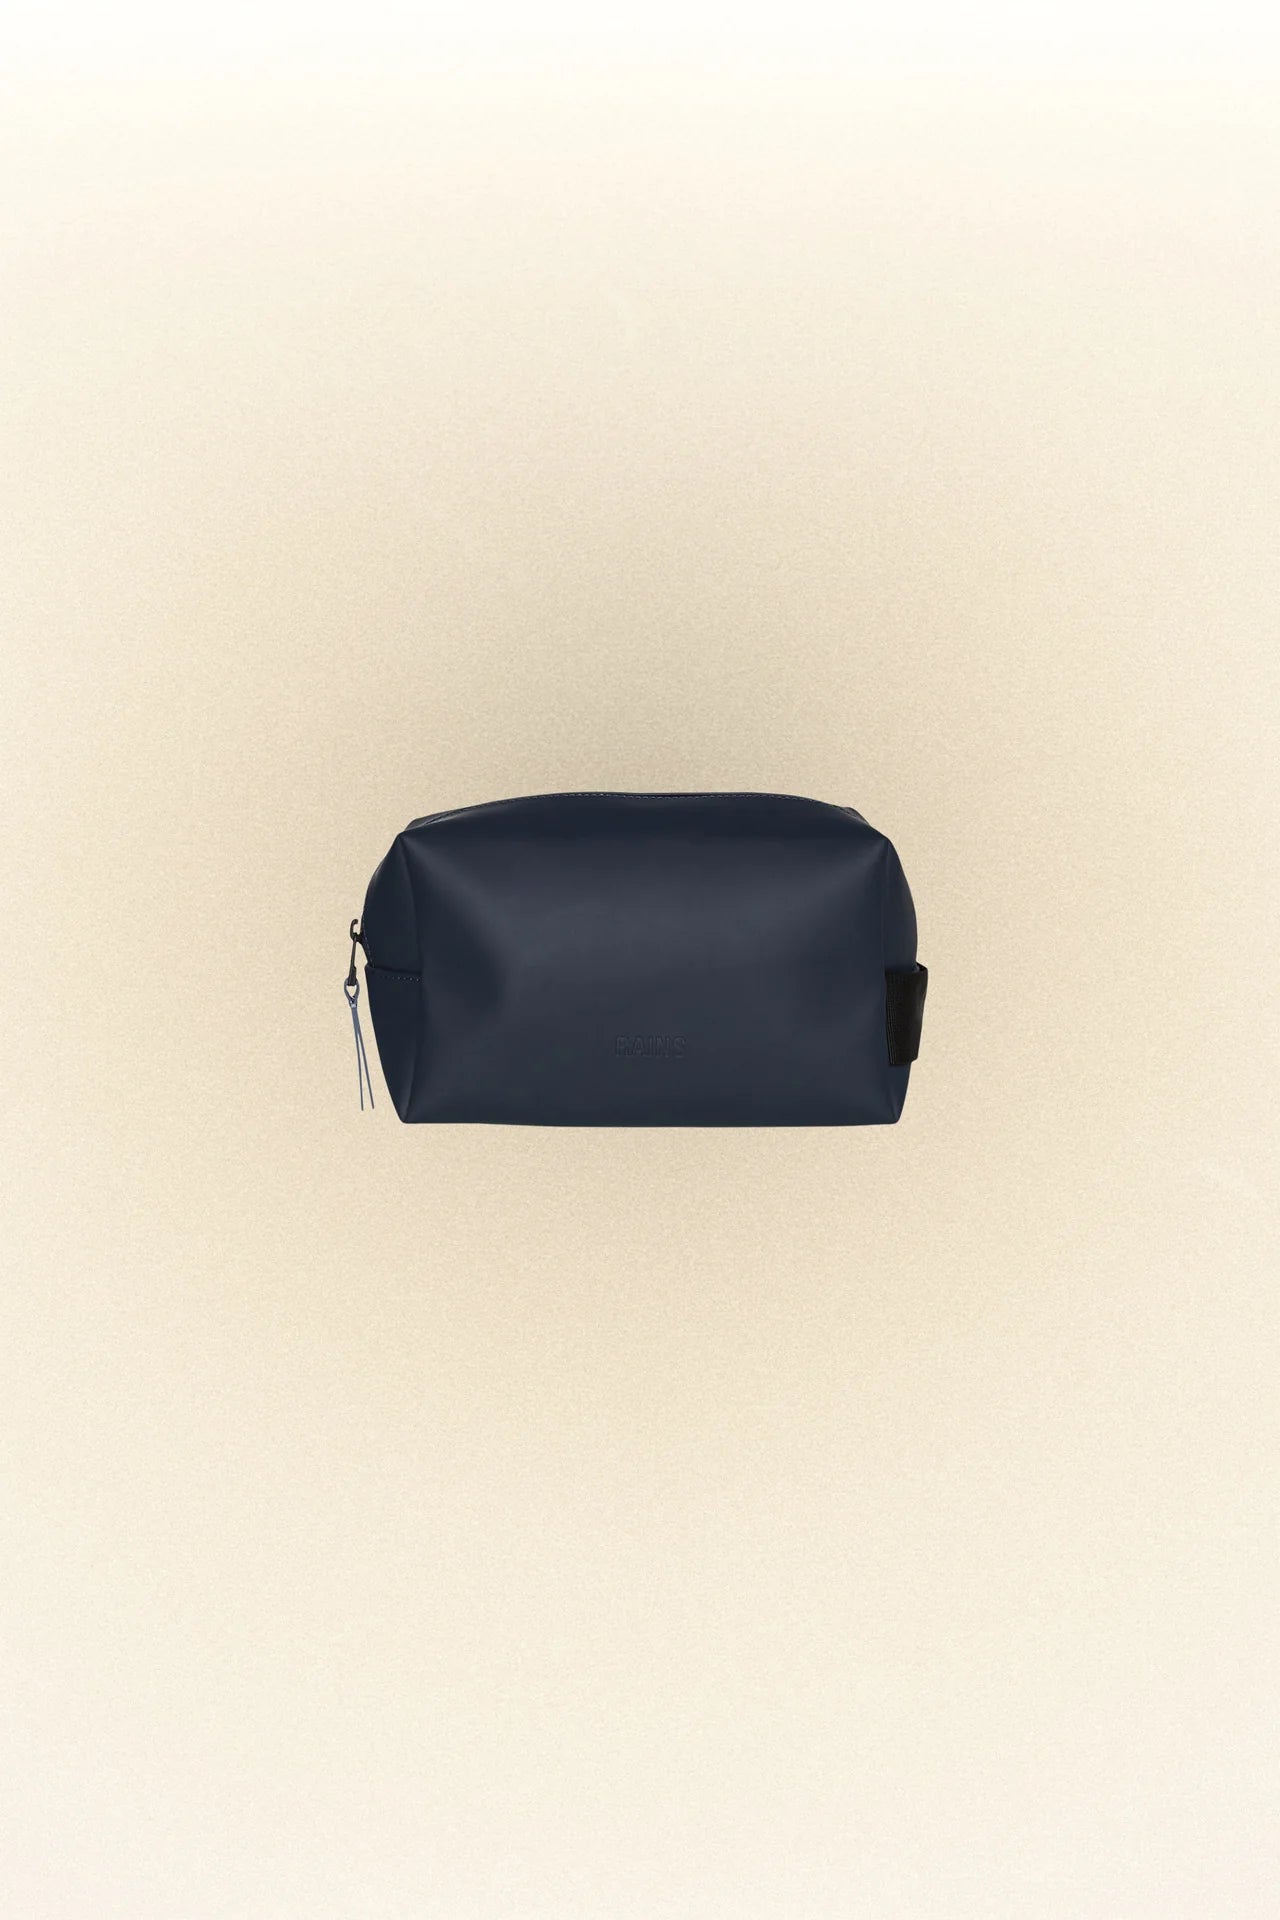 A Rains Wash Bag Small, a small blue waterproof zippered pouch, ideal for toiletries, on a white background.